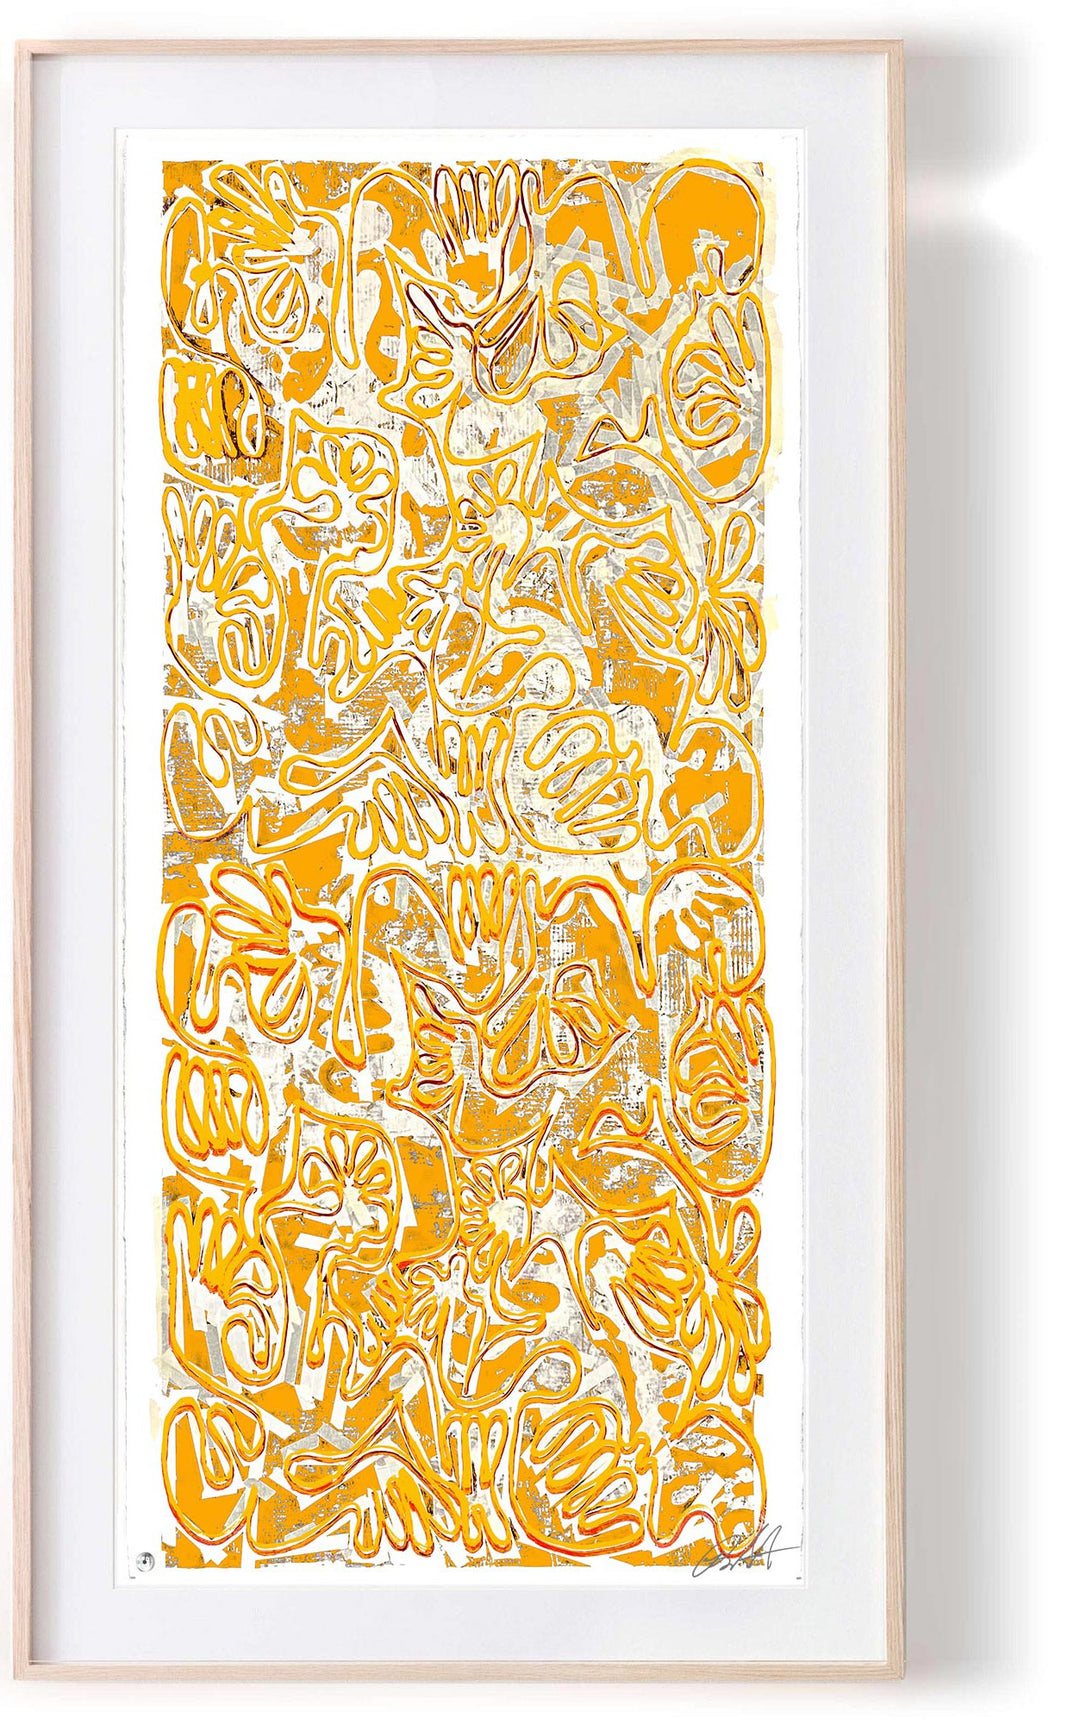 "COVID CHAOS Versace Gold No 1" by Robert Santore ©2021. Framed, Hand painted artist silkscreen print, hand printed on the finest archival cold press cotton rag paper with hand torn edges. Painted in the Texas studio.